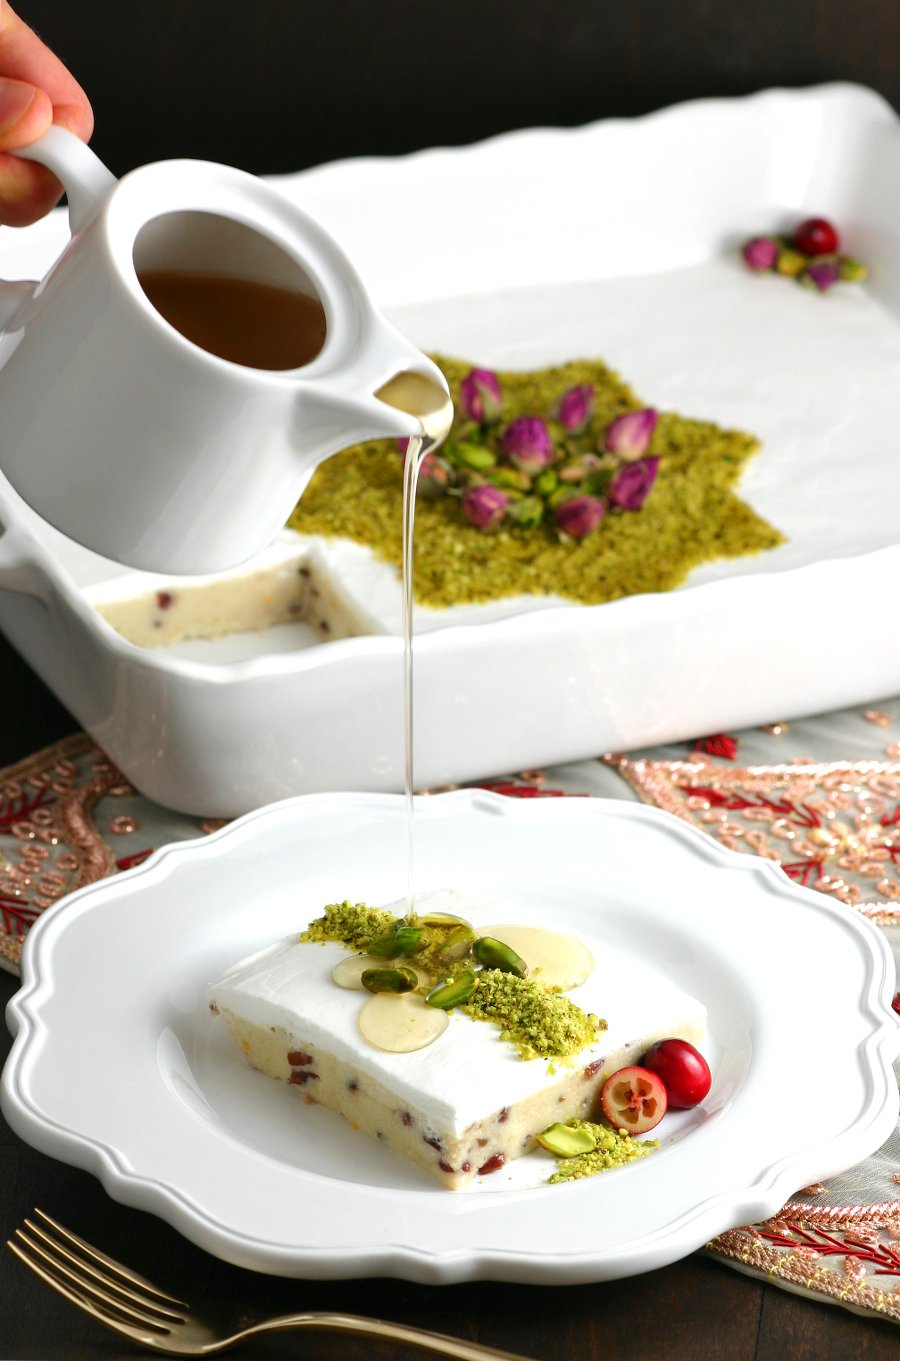 A very popular dessert throughout the Middle East, this Lebanese Semolina Pudding (Layali Lubnan) includes sweet-tart cranberries, thick coconut cream, ground pistachios, and a floral-scented syrup. This vegan recipe can be whipped up quickly, then it chills in the fridge until you are ready to dig in.